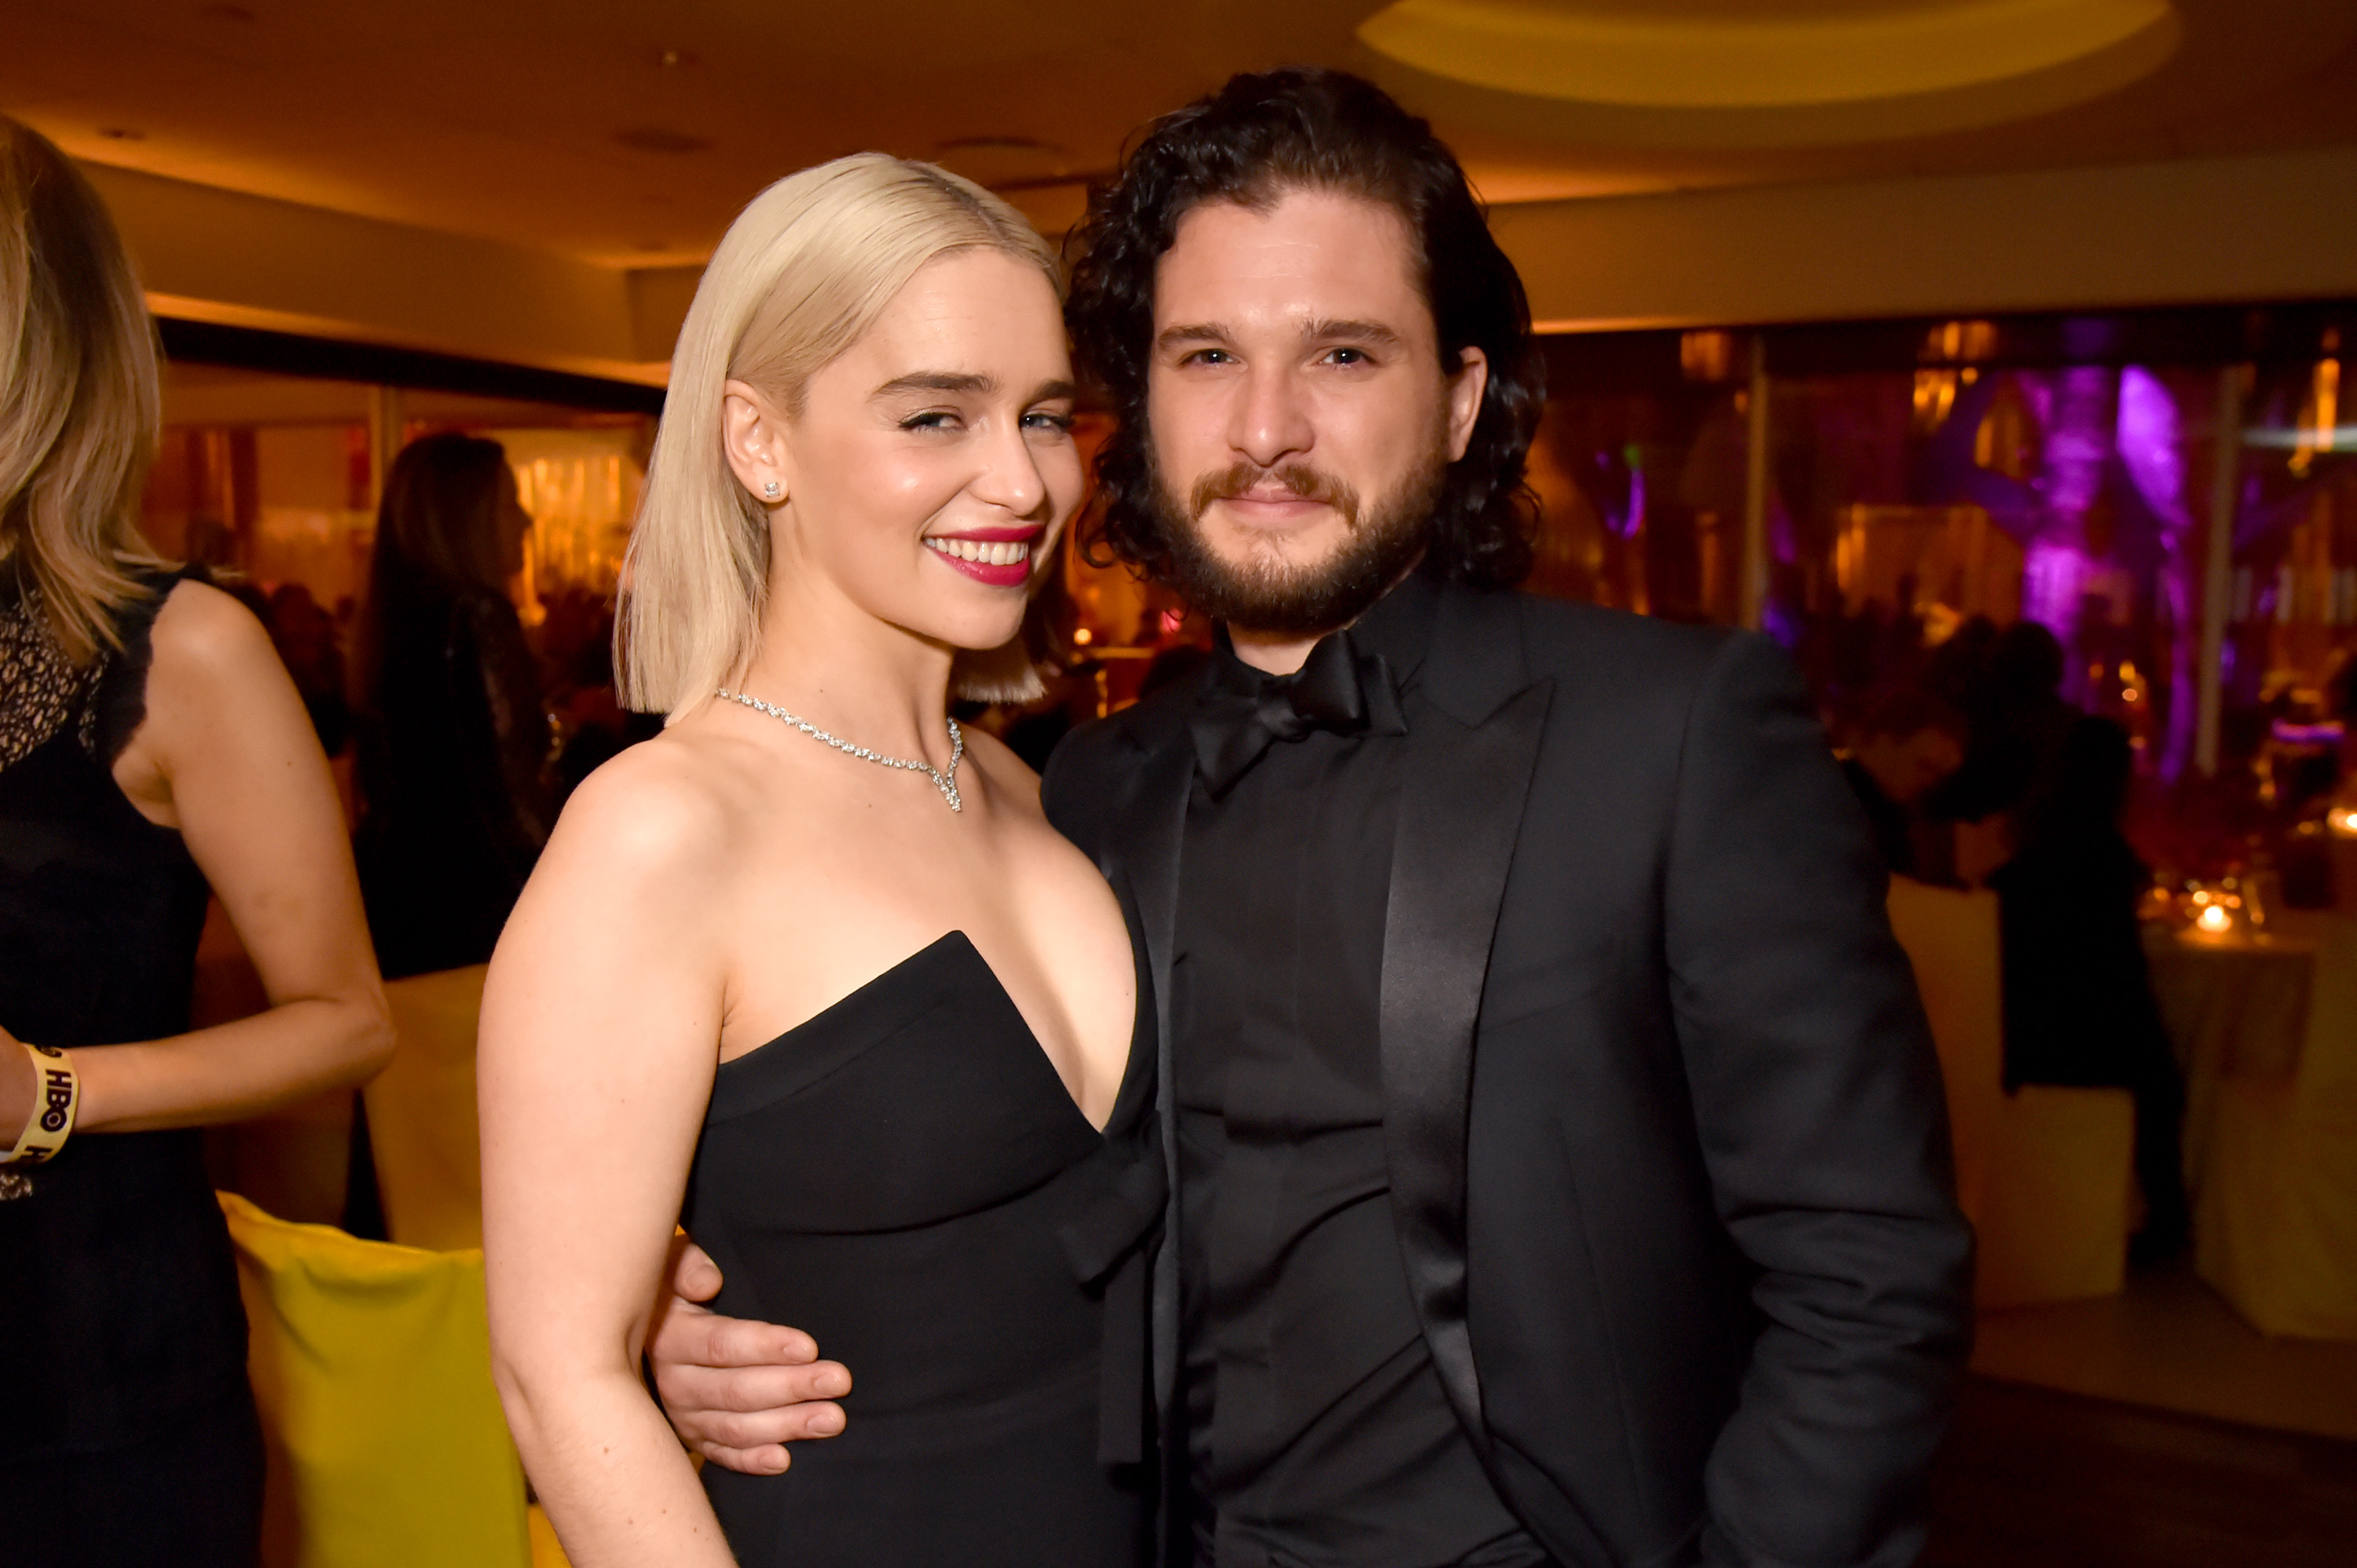 LOS ANGELES, CA - JANUARY 07:  Emilia Clarke and  Kit Harington of 'Game of Thrones' attends HBO's Official 2018 Golden Globe Awards After Party on January 7, 2018 in Los Angeles, California.  (Photo by Jeff Kravitz/FilmMagic for HBO) (Jeff Kravitz&mdash;FilmMagic for HBO)